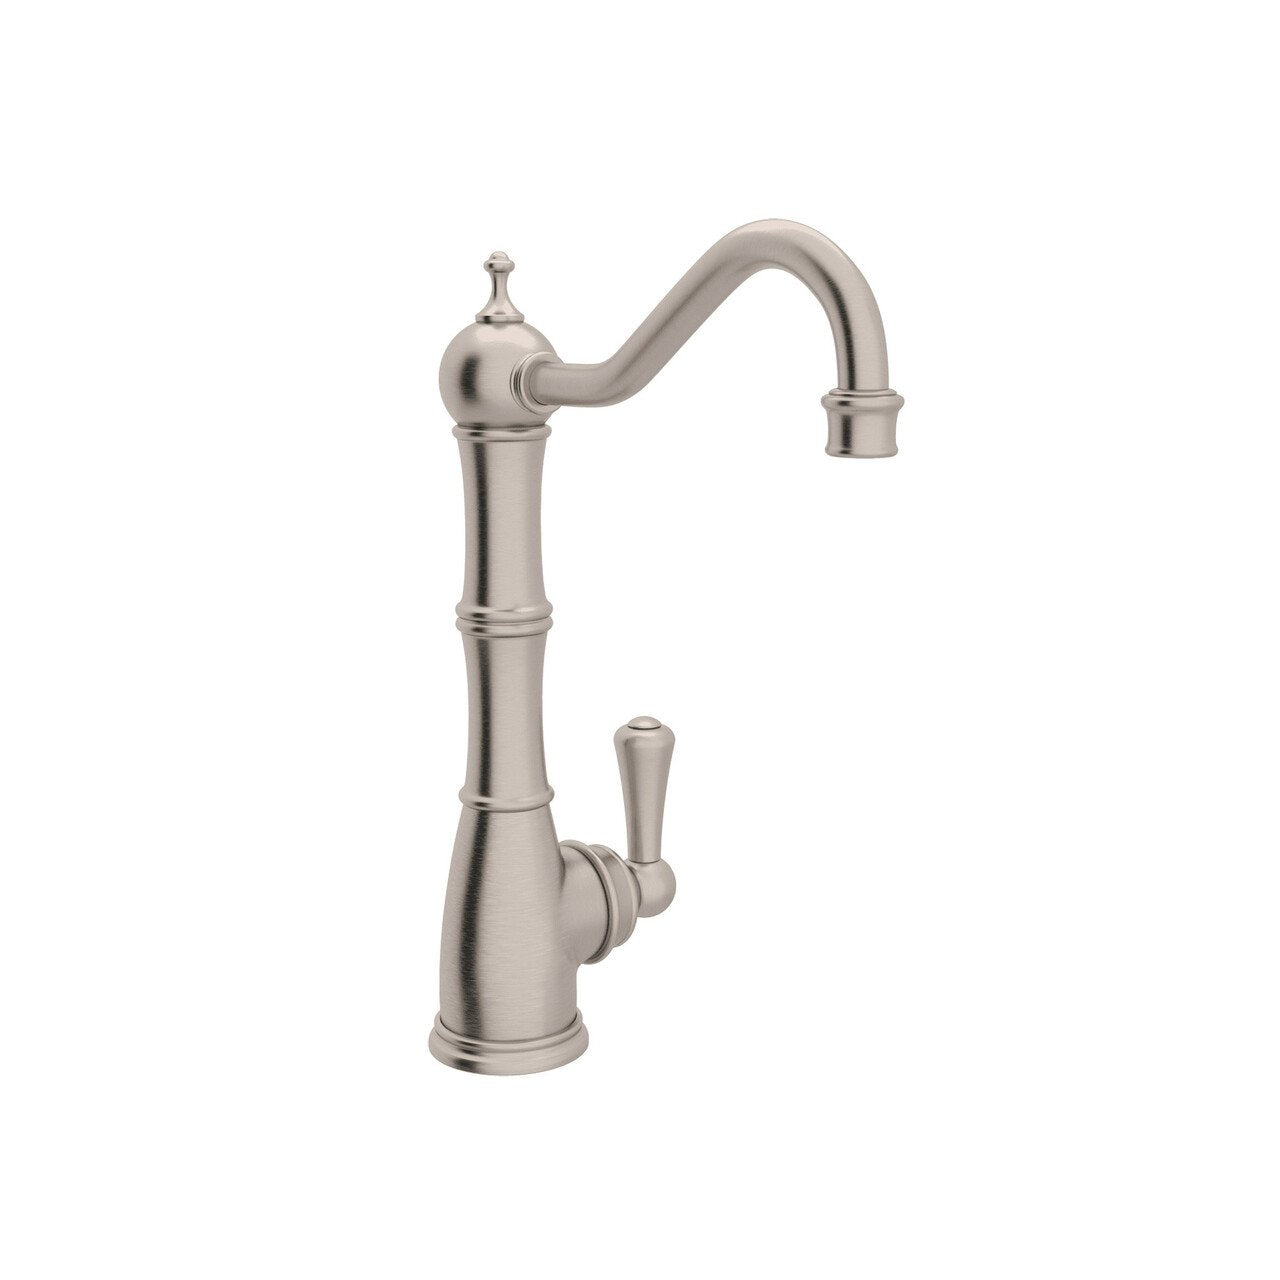 Perrin & Rowe Edwardian Column Spout Filter Faucet - BNGBath